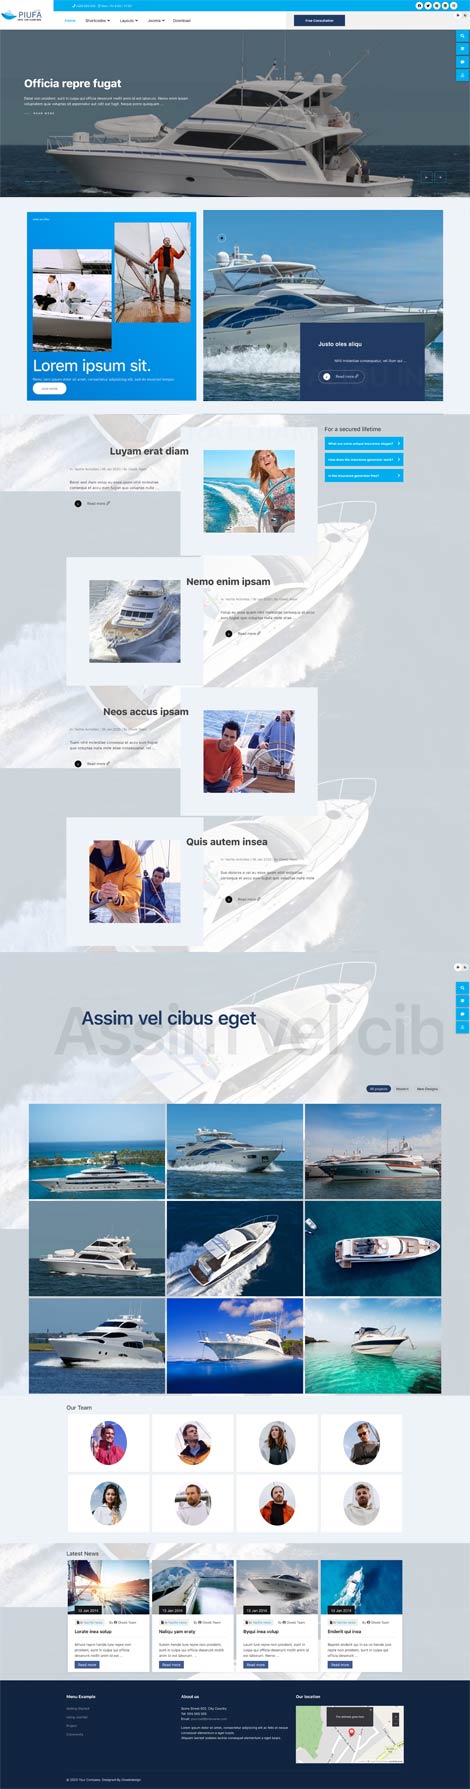 Yacht and Boat Rental Joomla Template